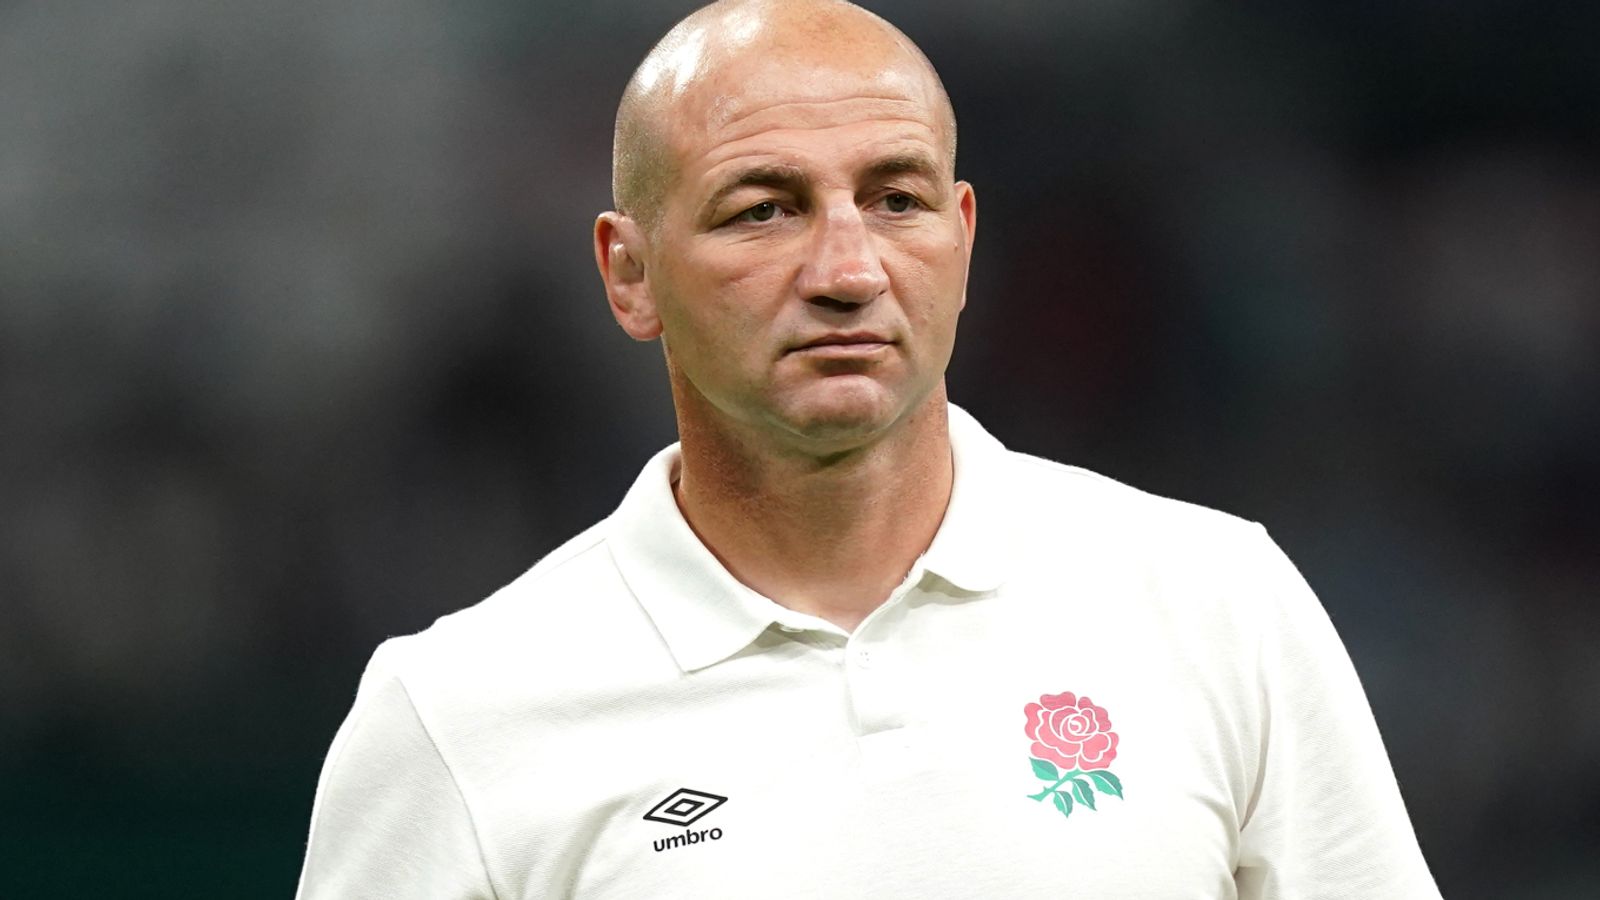 Rugby World Cup 2023: England head coach Steve Borthwick highlights World Rugby over inconsistency | Rugby Union Information